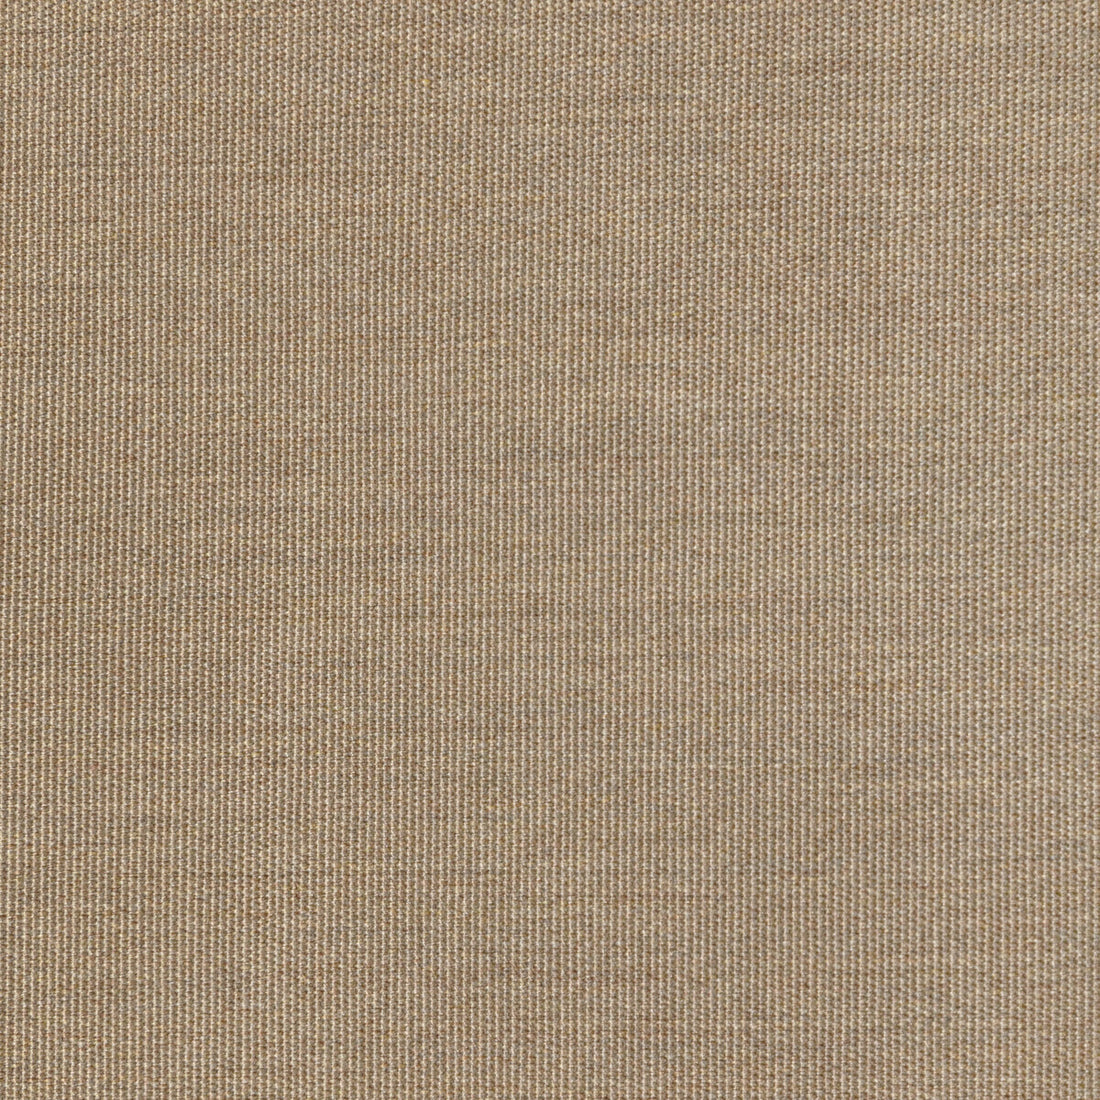 Kravet Basics fabric in 36843-1616 color - pattern 36843.1616.0 - by Kravet Basics in the Indoor / Outdoor collection